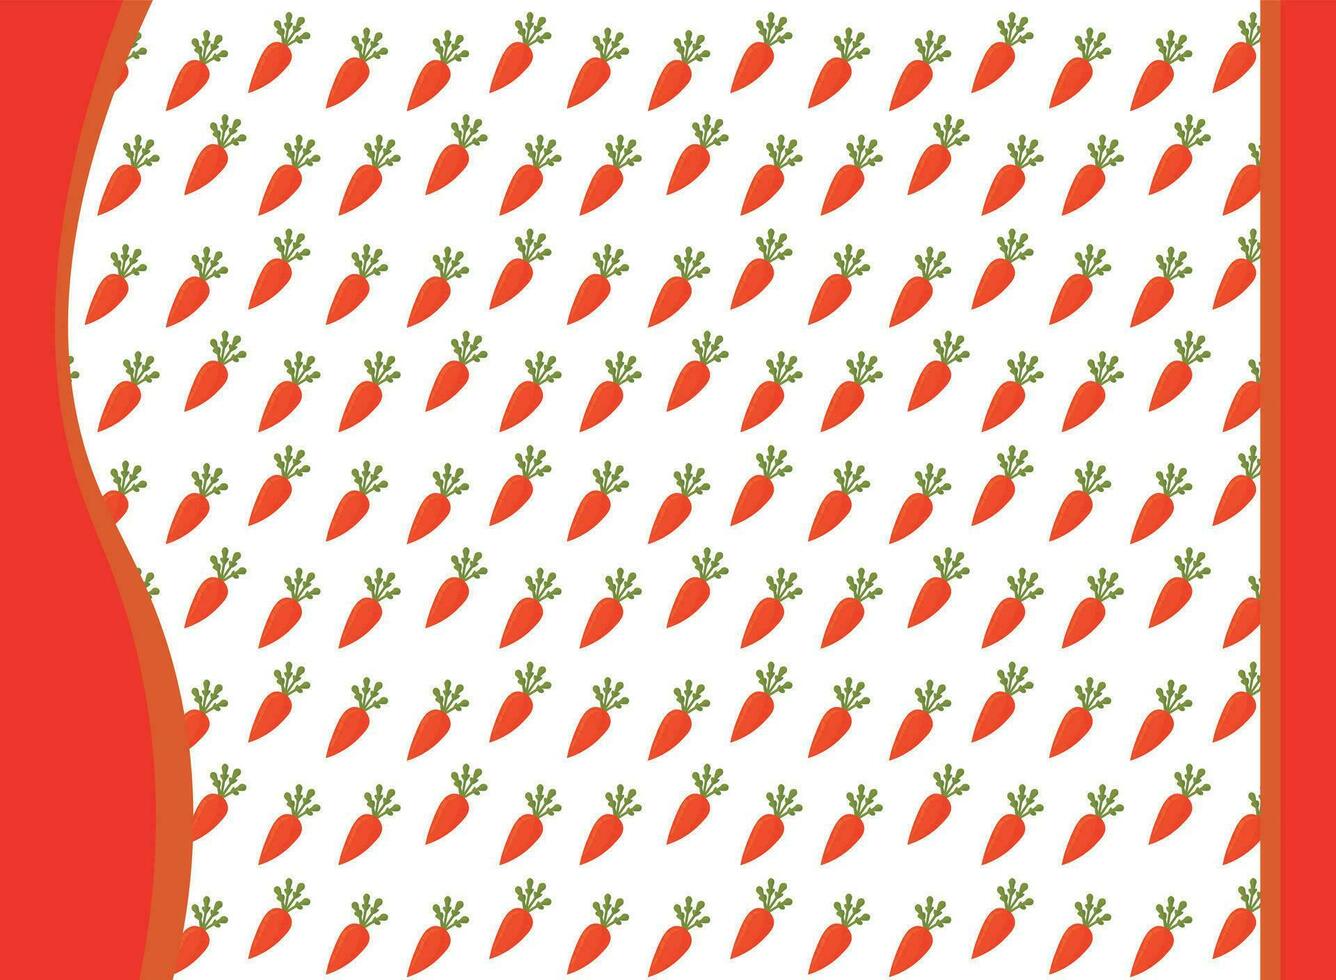 Carrot pattern, background for kitchen fabrics or backgrounds for design, carrot repeat, great for vegan publication background too vector